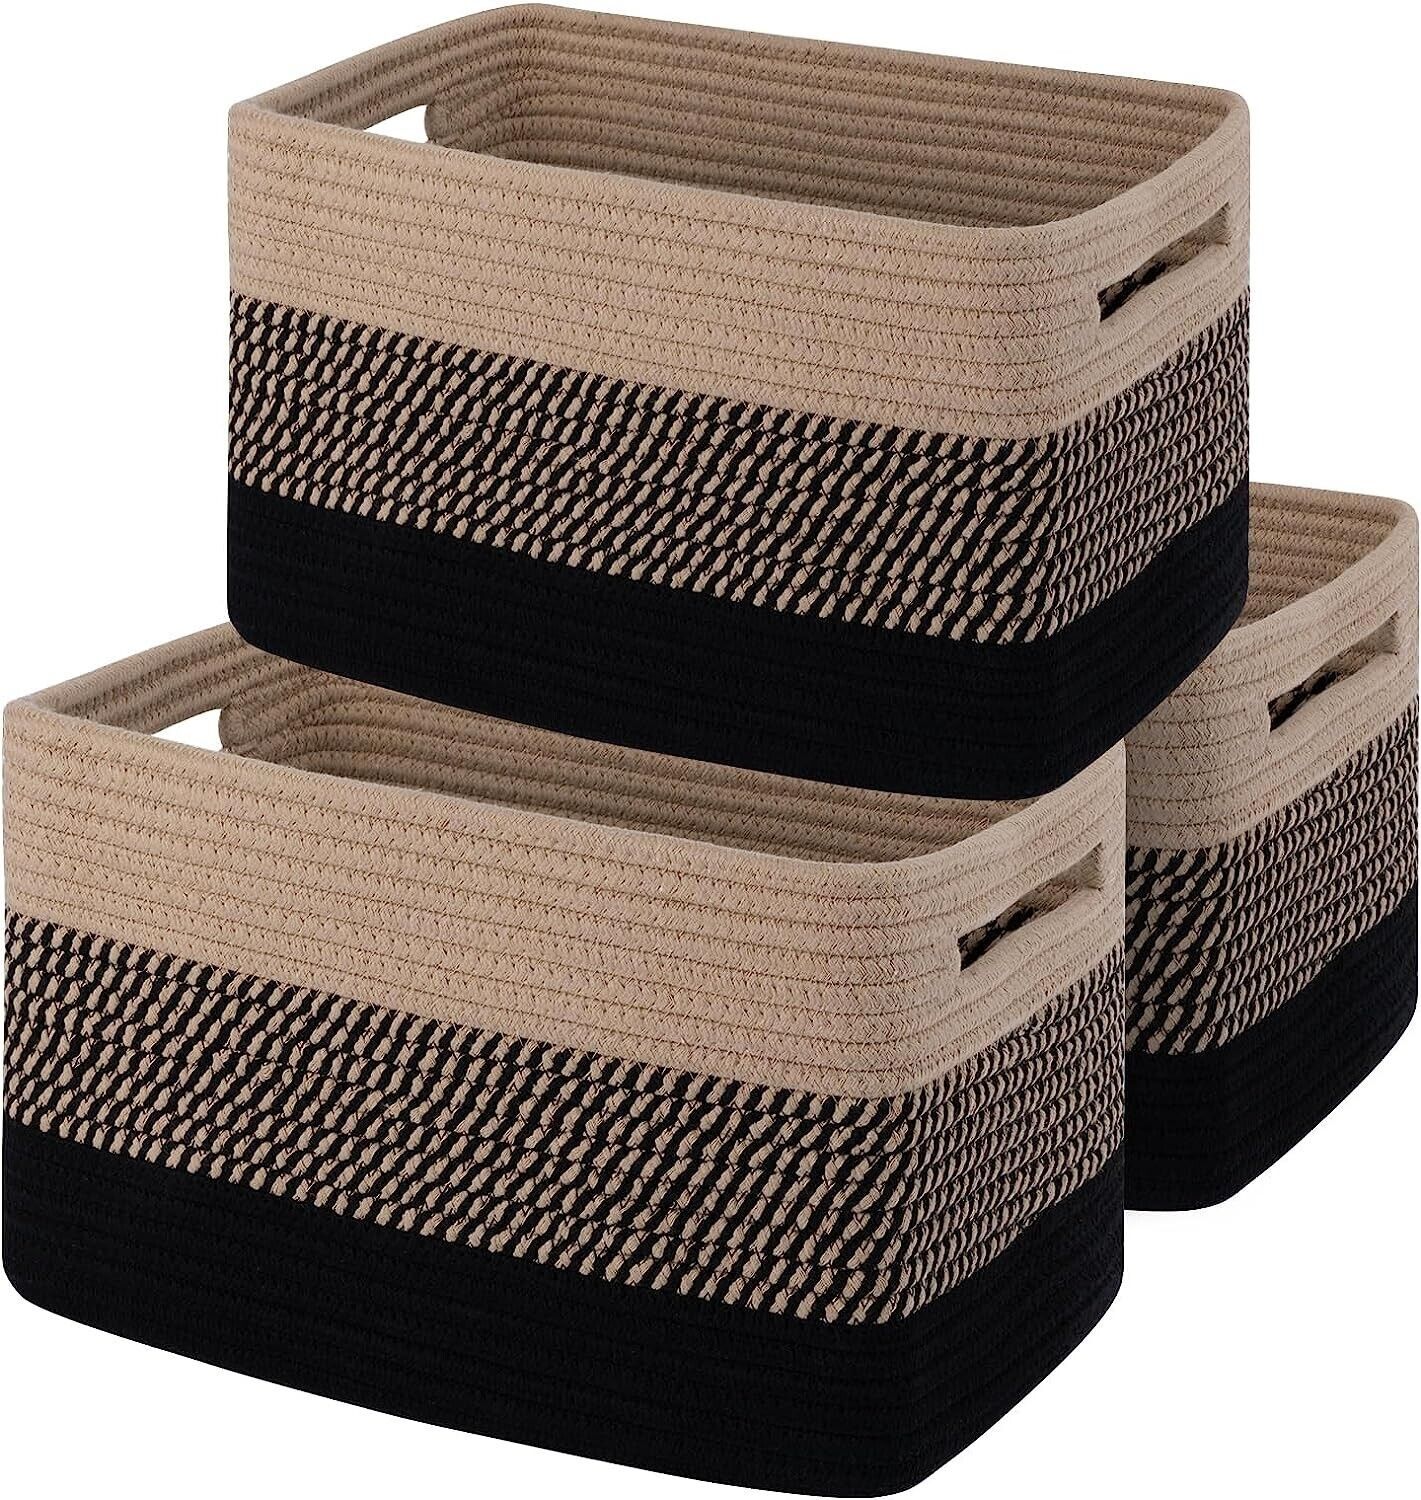 Primary image for OIAHOMY Storage Basket, Woven Baskets for Storage, Pack of 3, Black & Brown